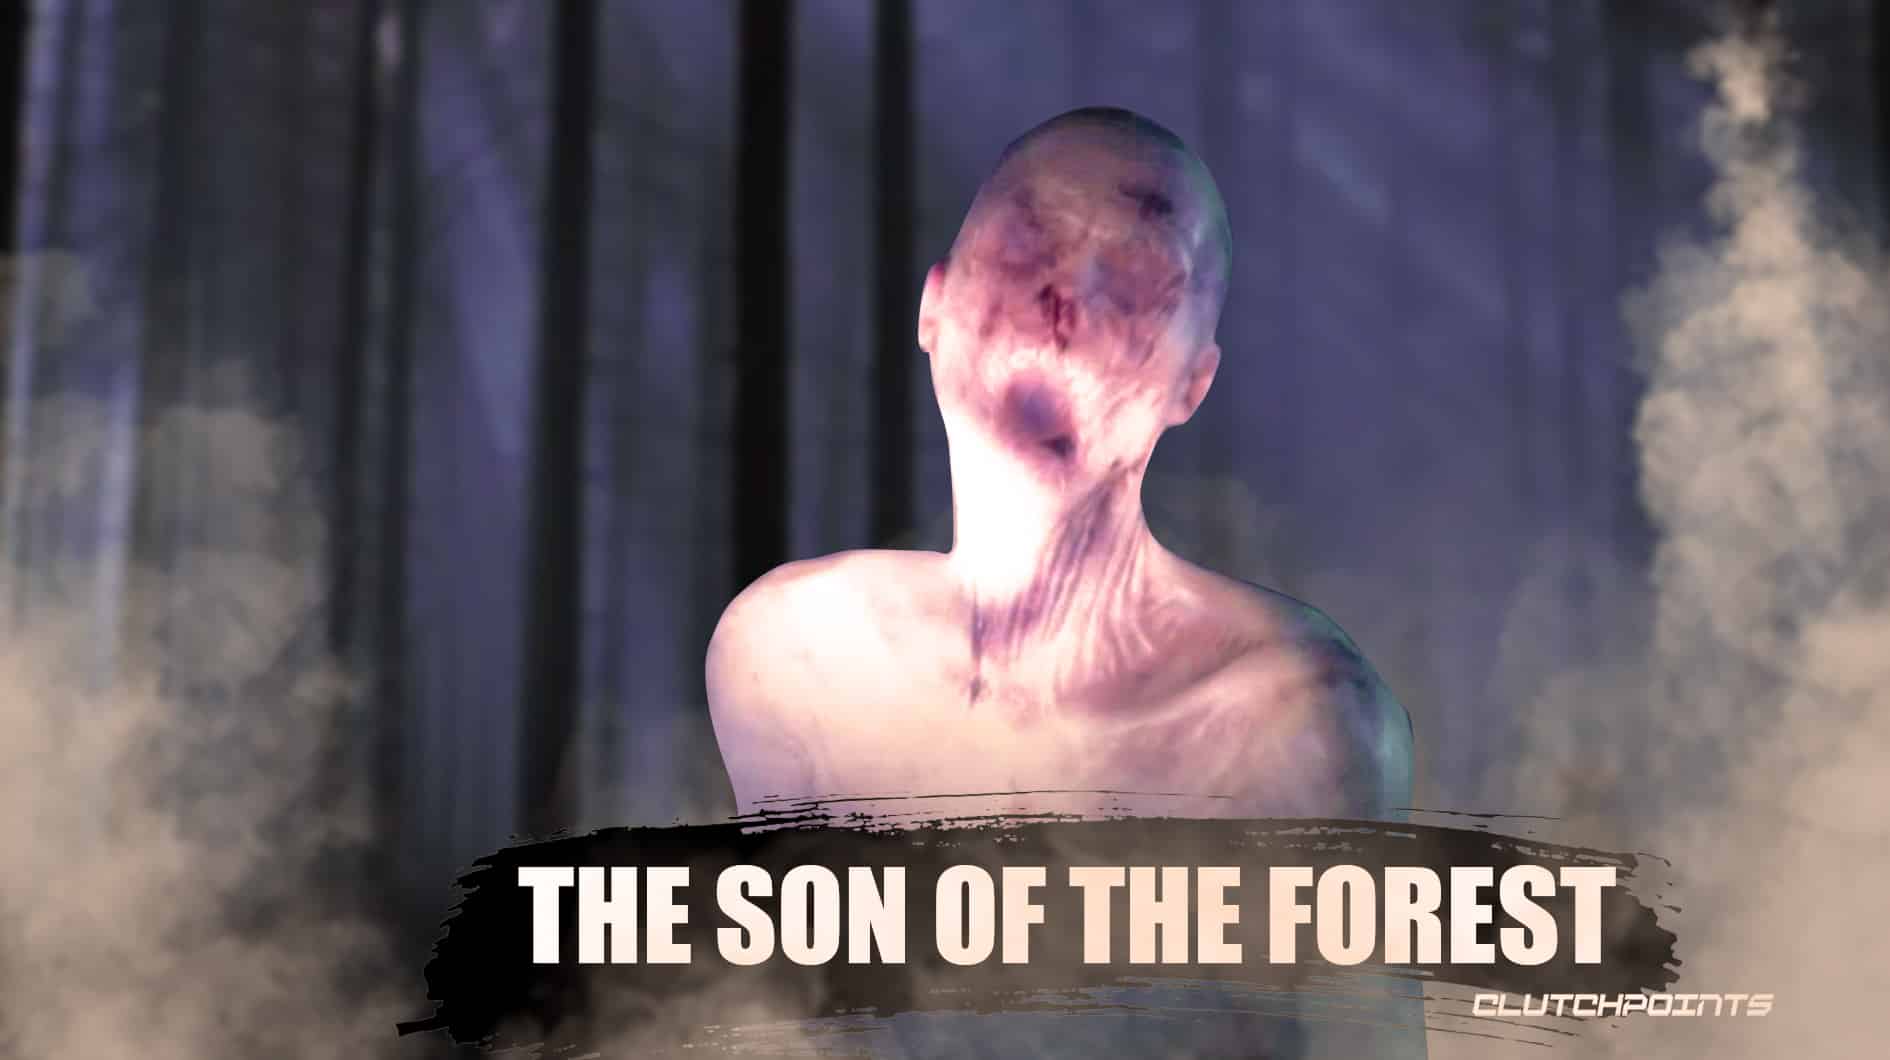 Sons of the forest is coming to playstation in 2024 #sonsoftheforest #